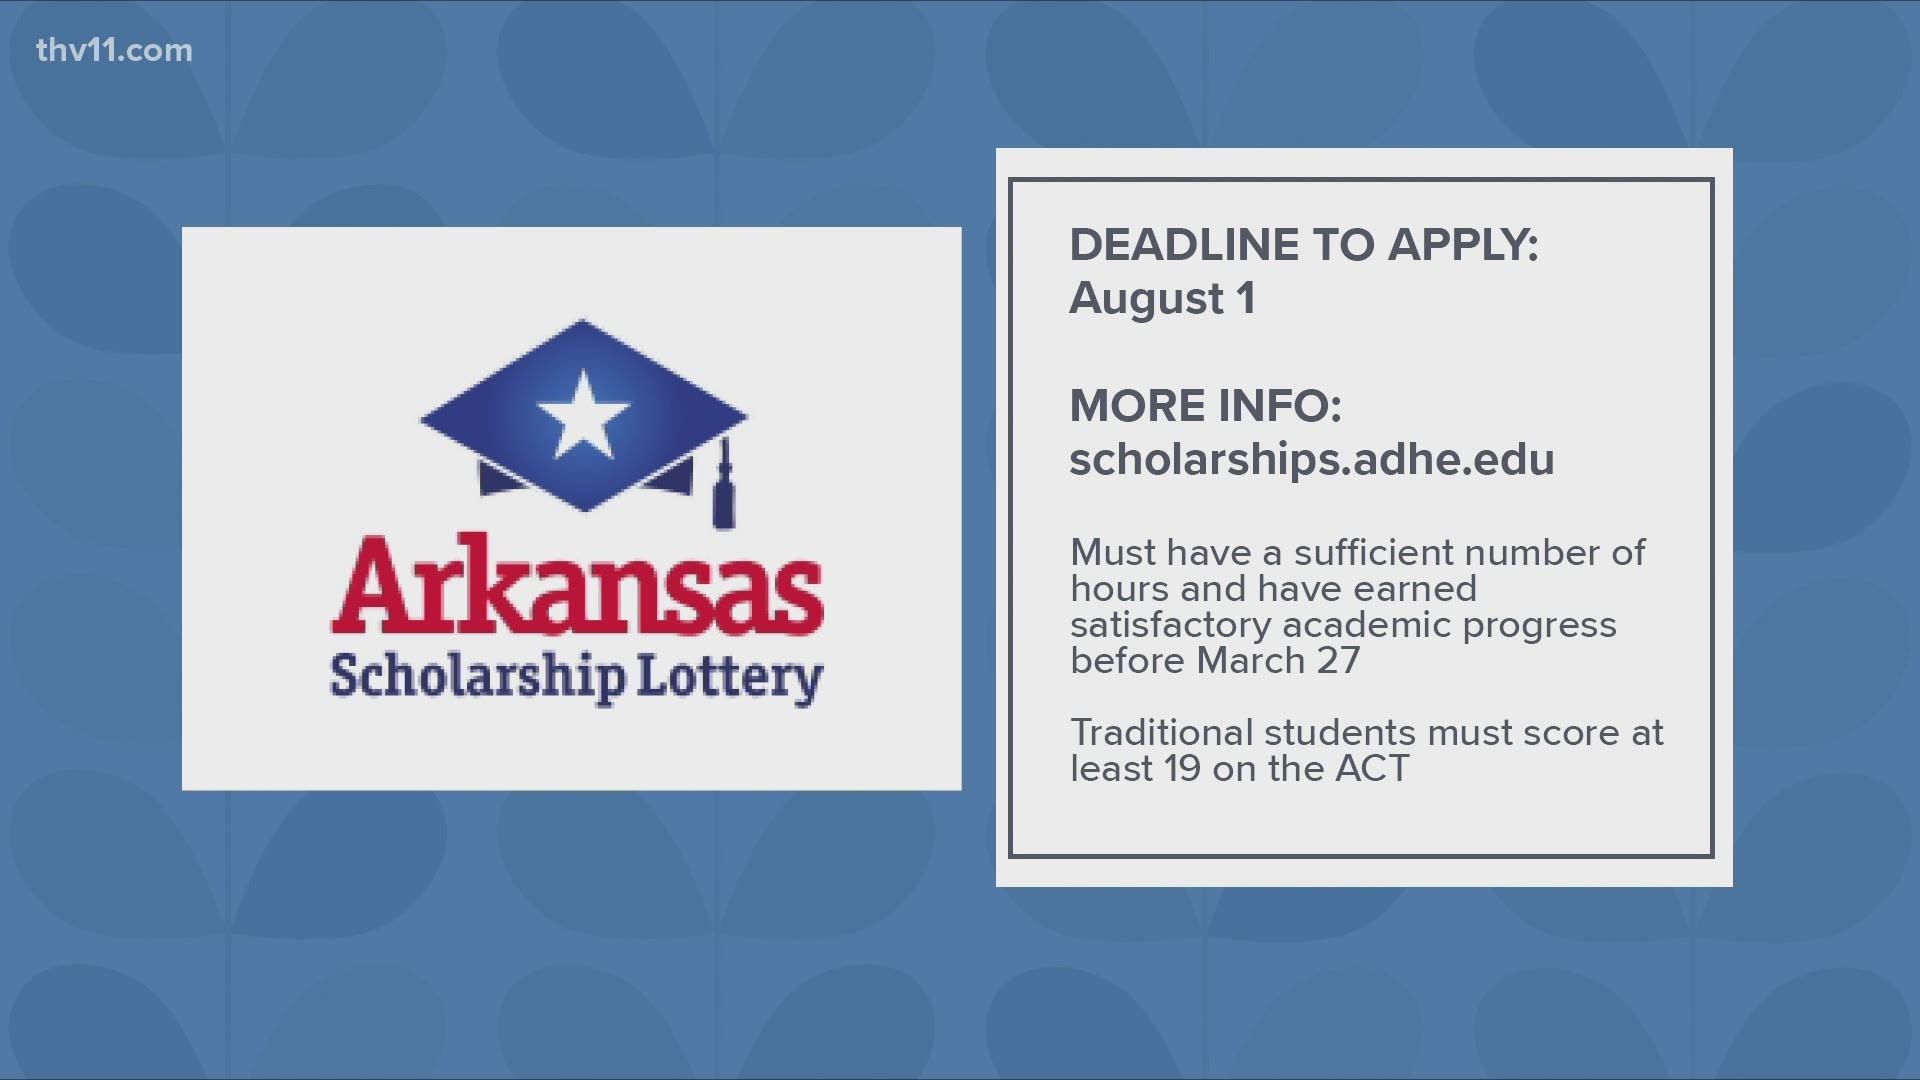 Find out who qualifies for the Arkansas Scholarship Lottery as the deadline quickly approaches.